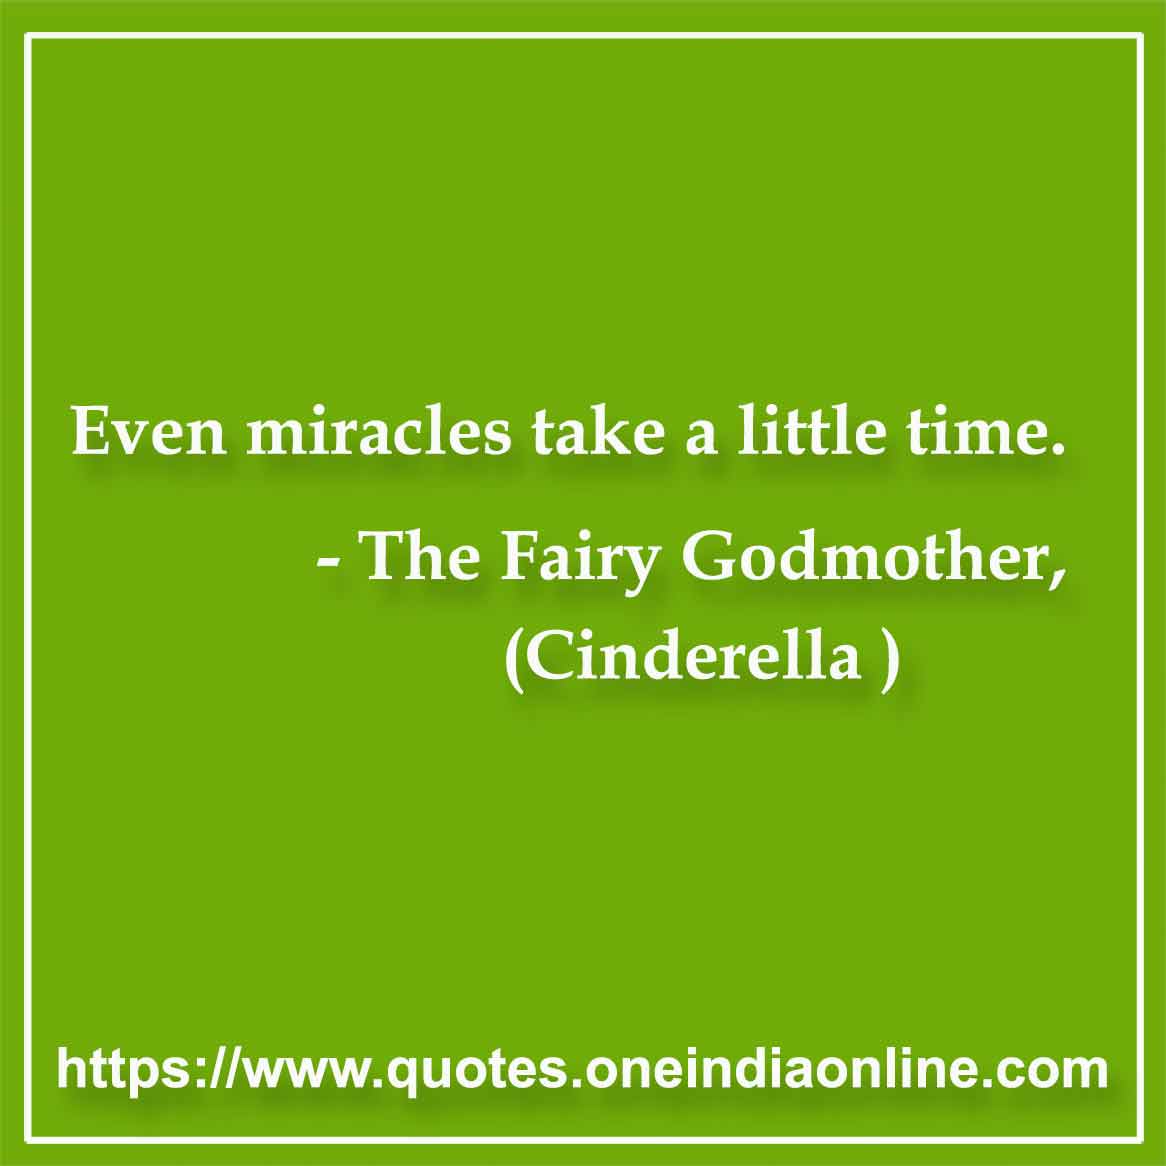 Even miracles take a little time.

- Short  by The Fairy Godmother, Cinderella